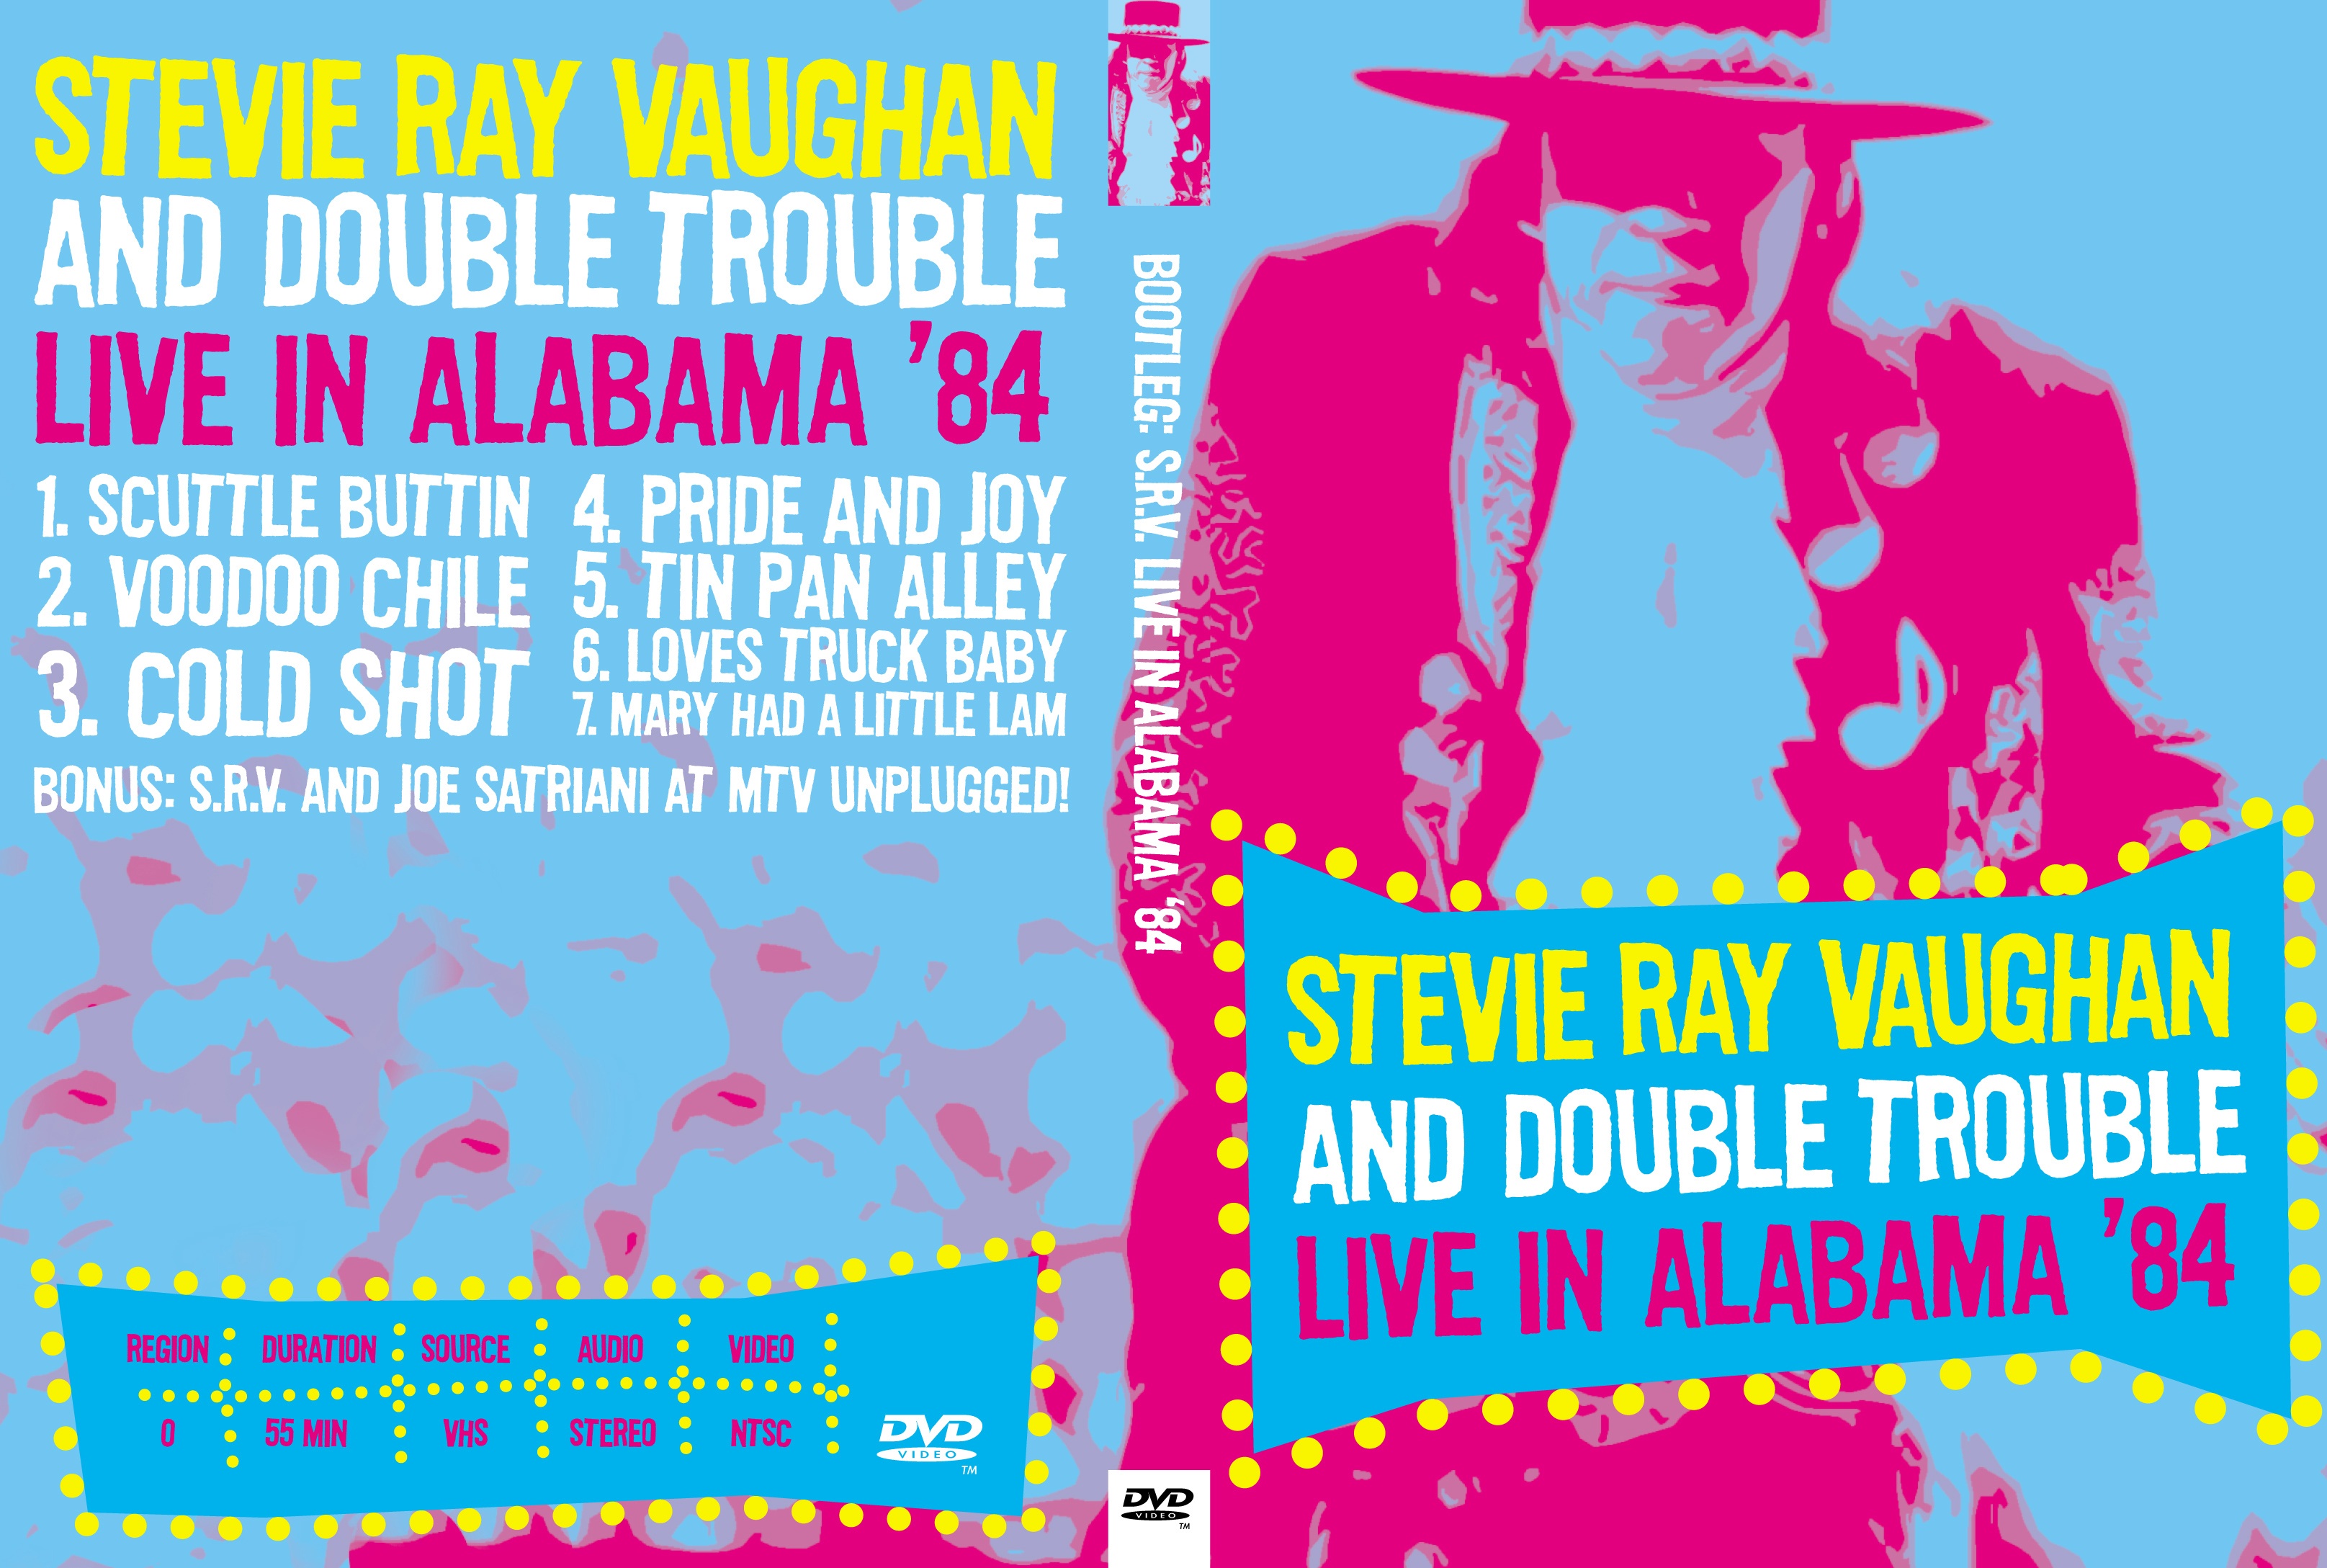 Jaquette DVD Stevie Ray Vaughan and double trouble - Live in Alabama 1984